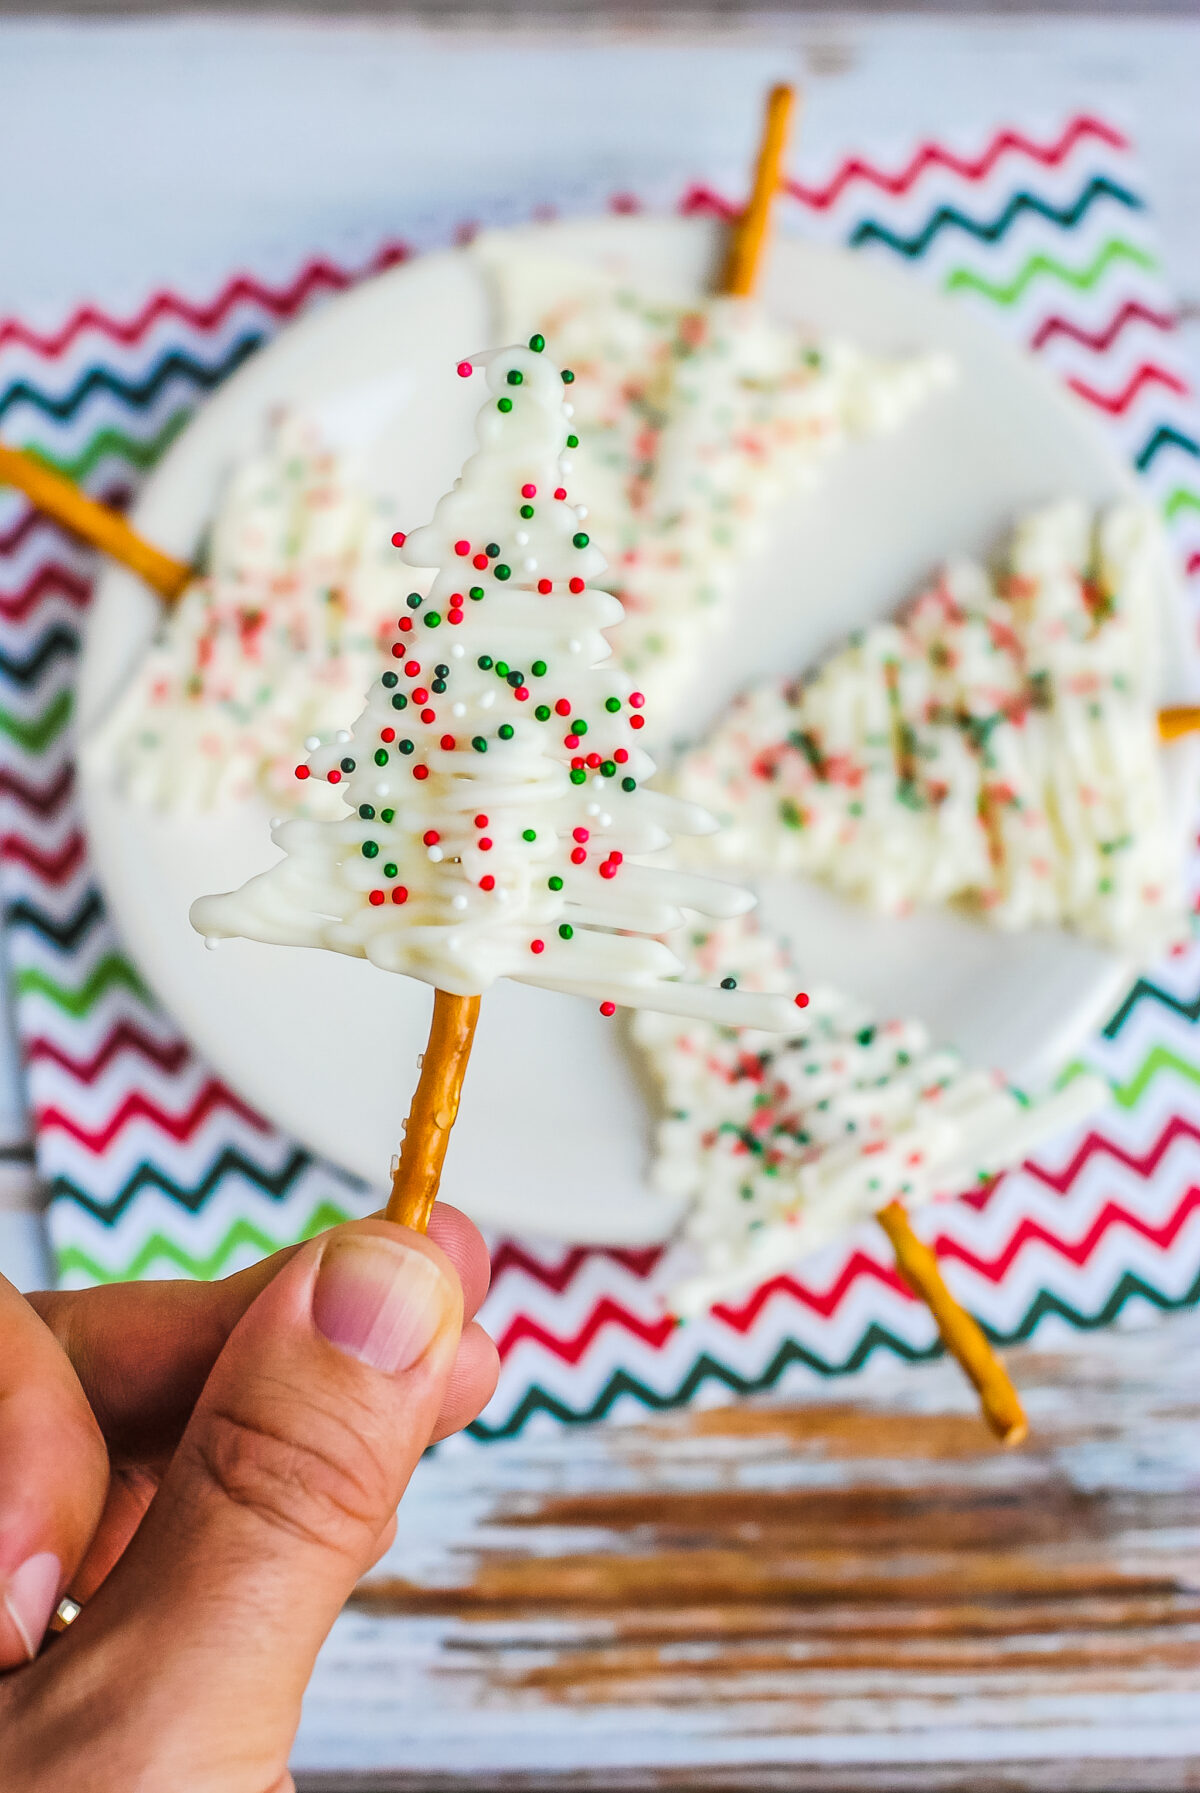 These White Chocolate Christmas Trees are perfect for serving at holiday parties as cupcake toppers, edible holiday gift ornaments, and more!